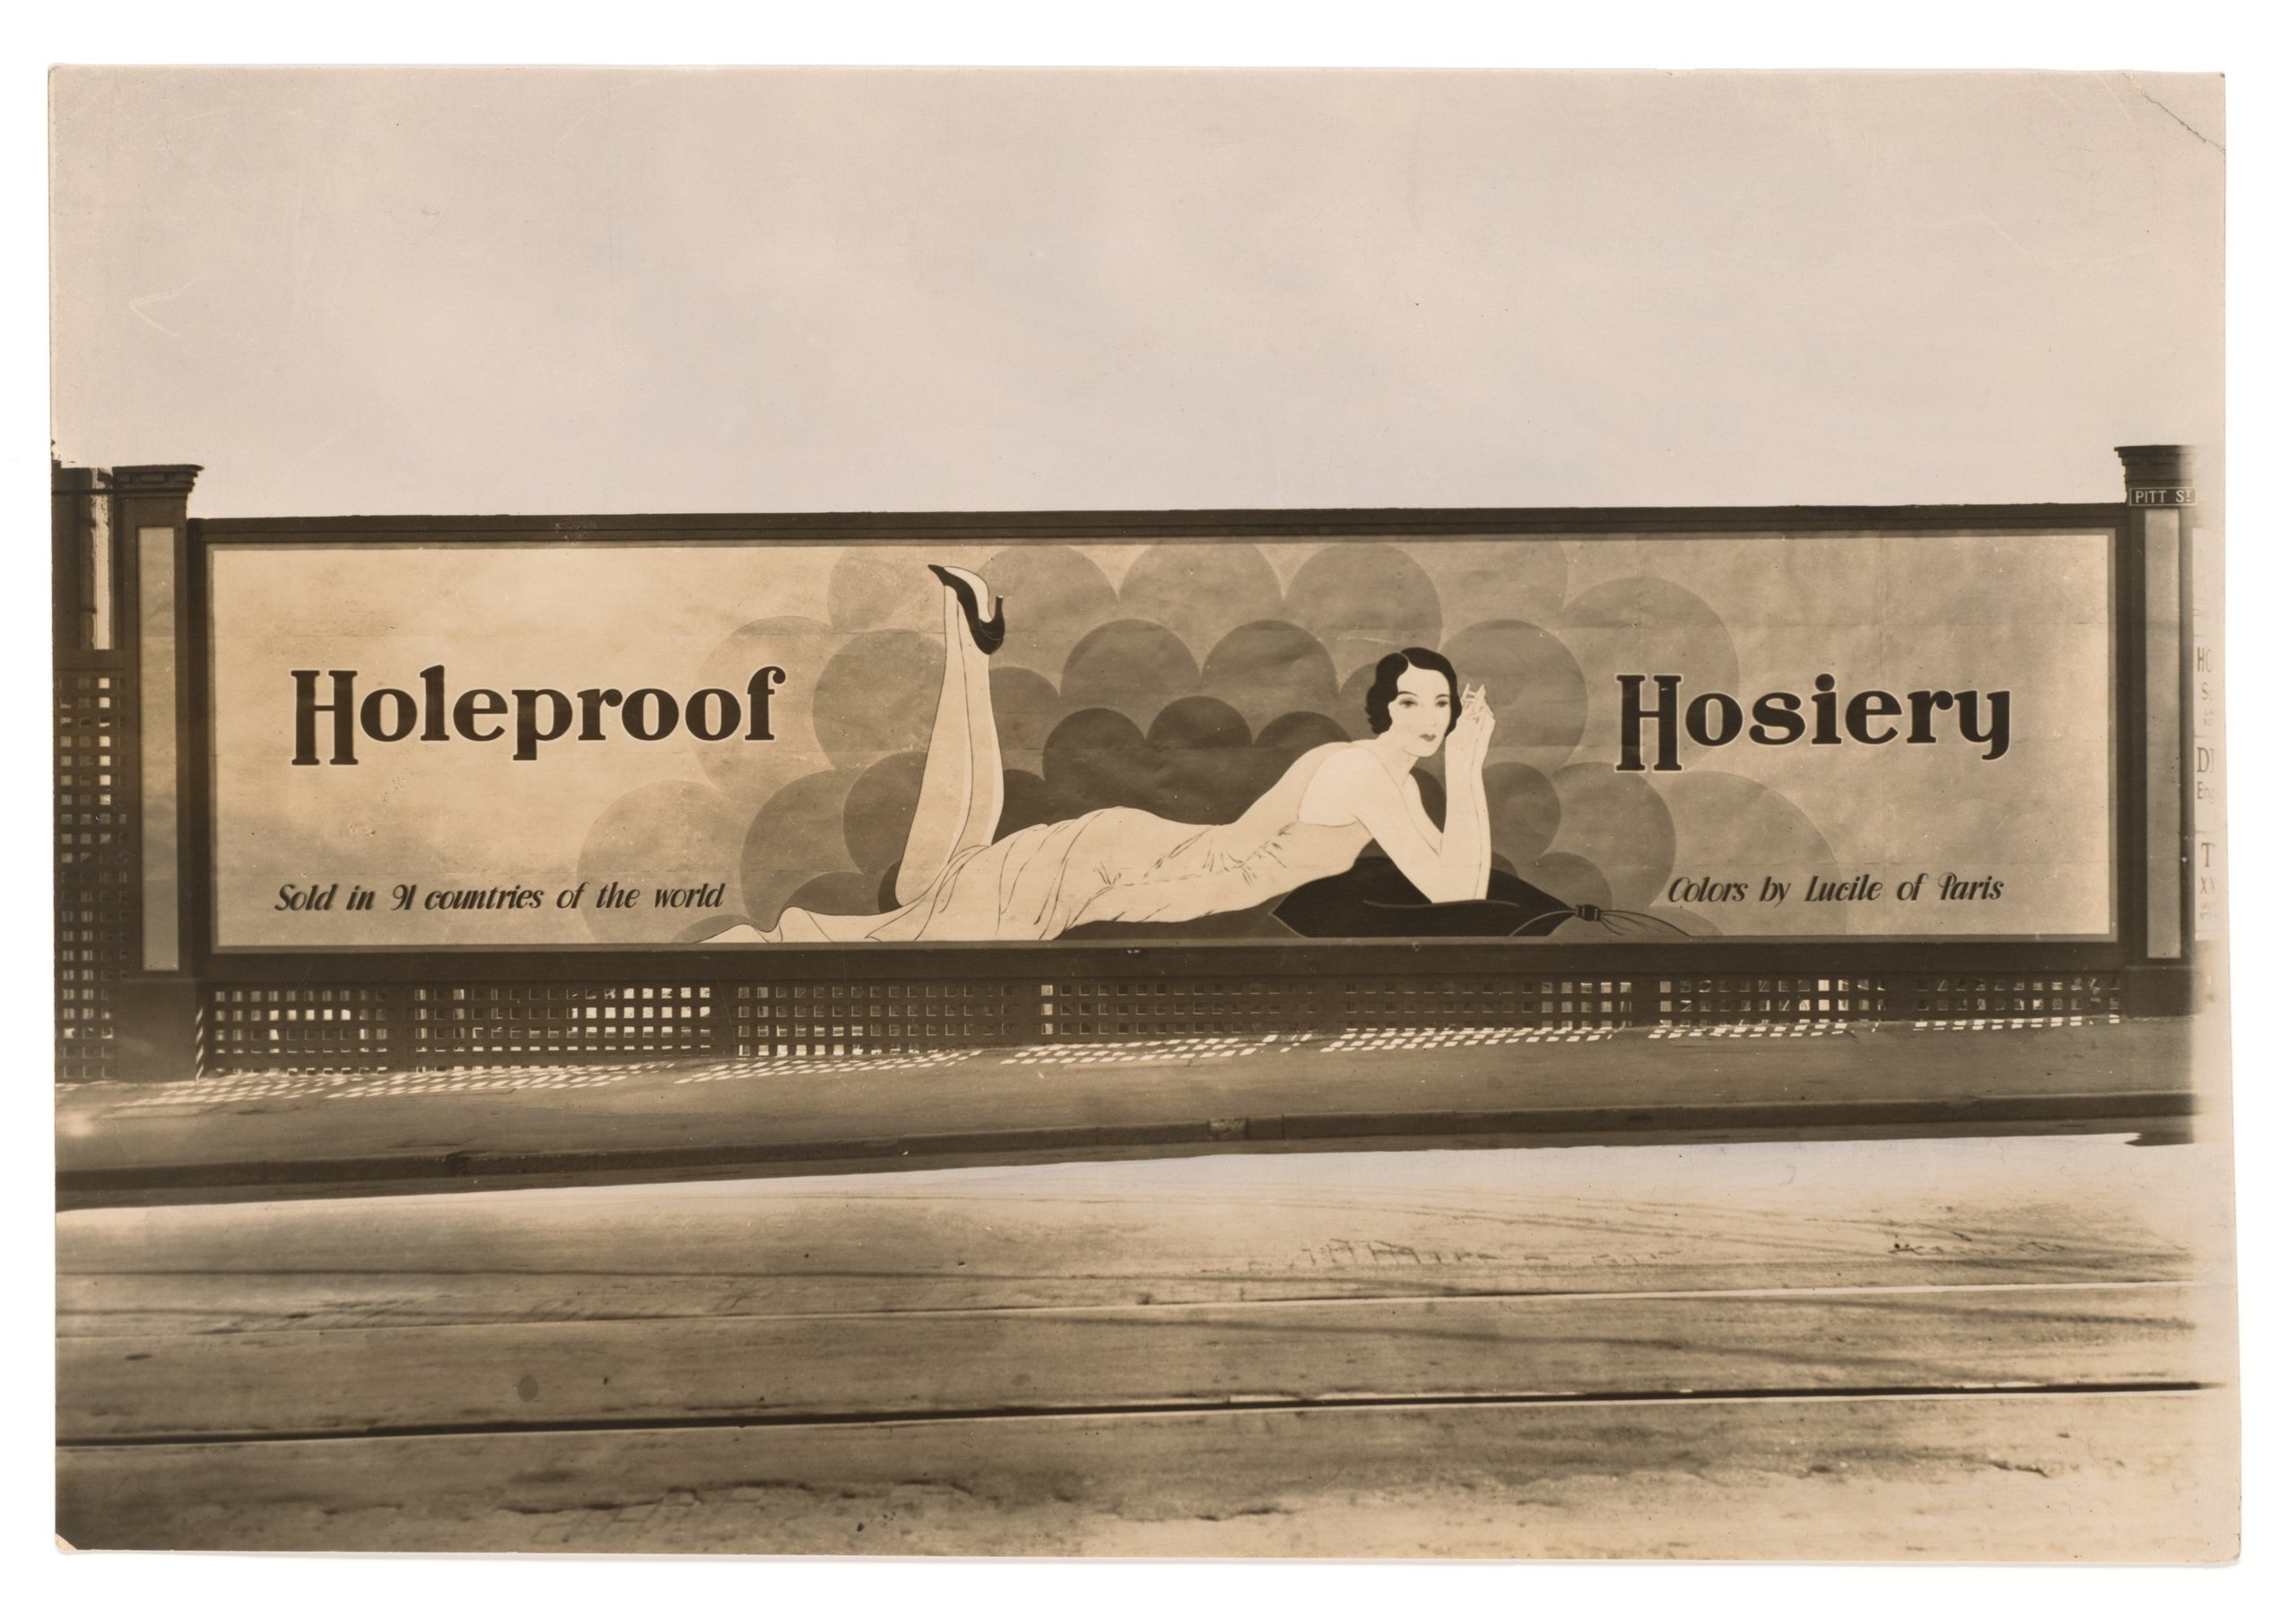 Photograph of advertising sign designed by Rousel Studios